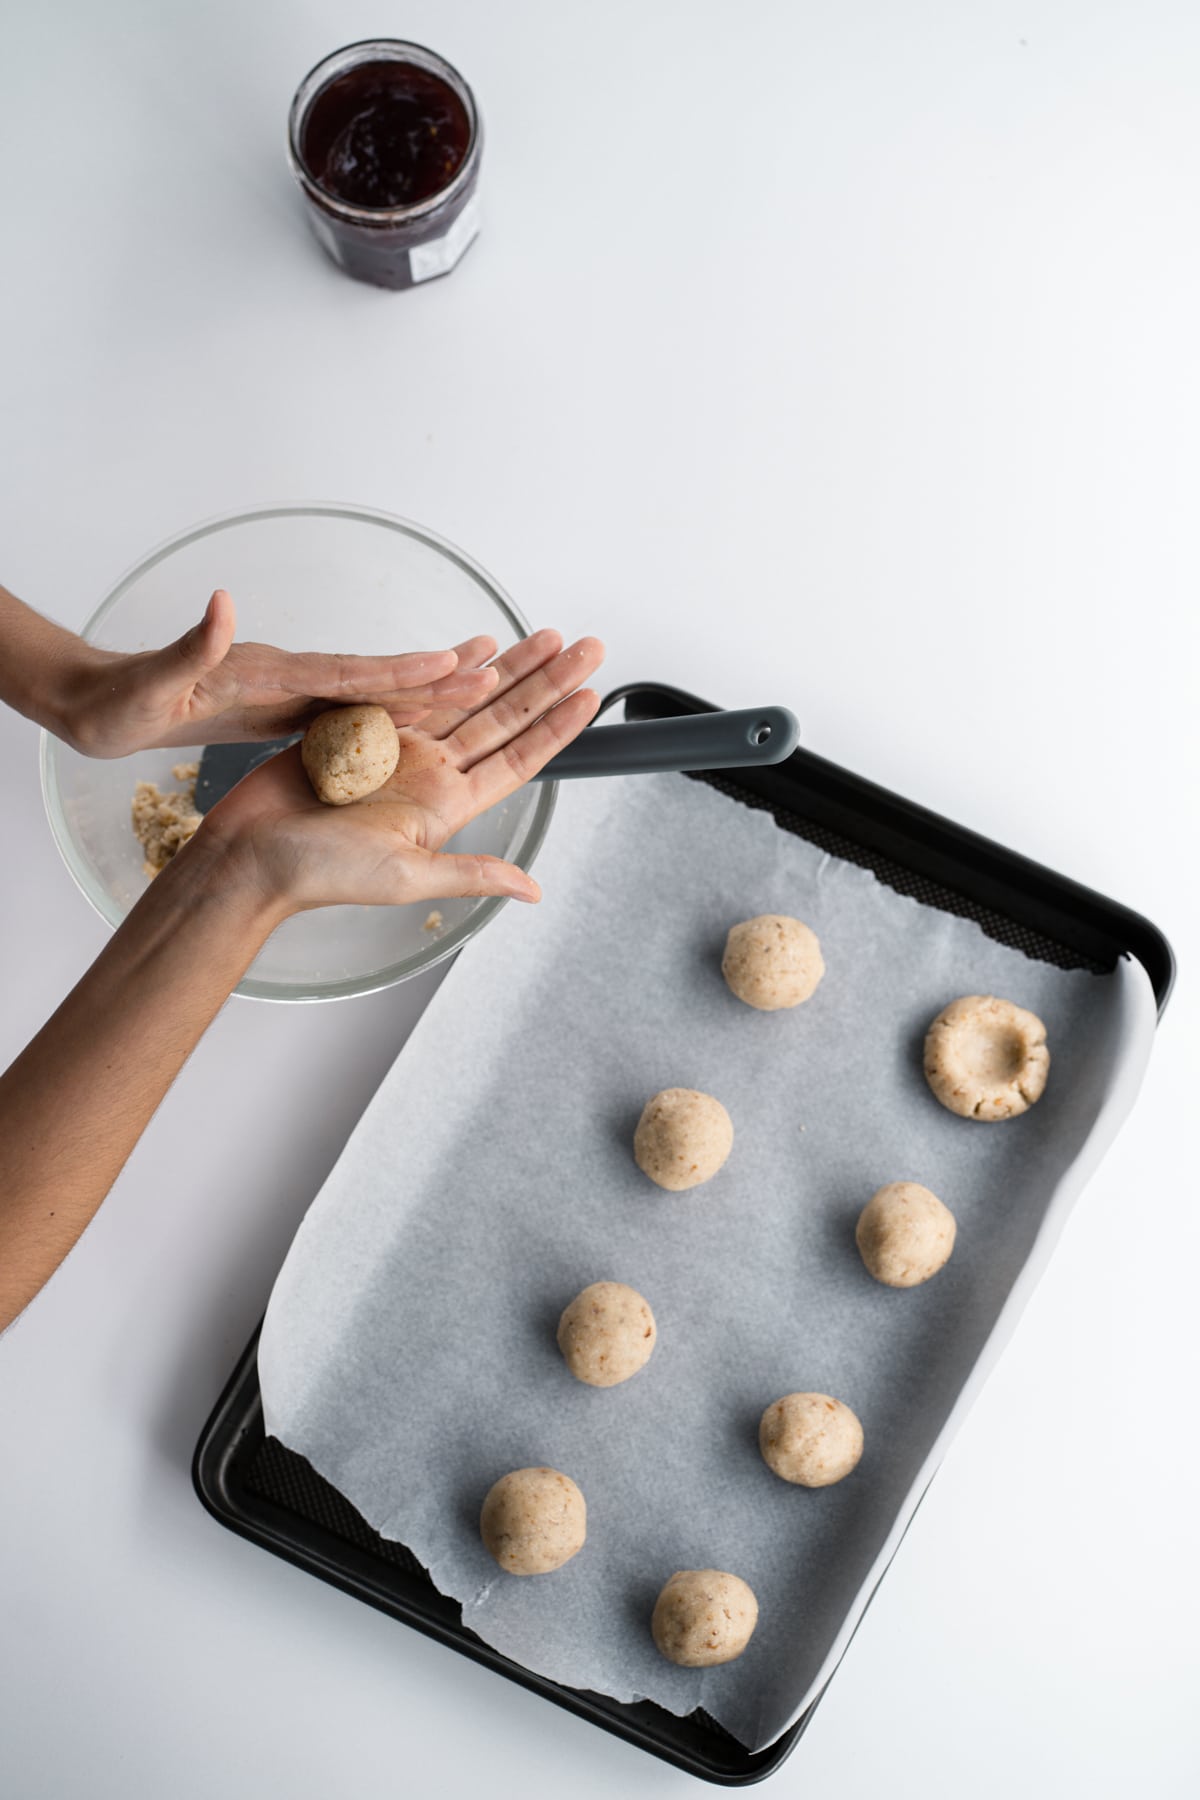 Almond flour thumbprint cookie dough on a baking sheet lined with parchment and hands above it rolling dough into balls.